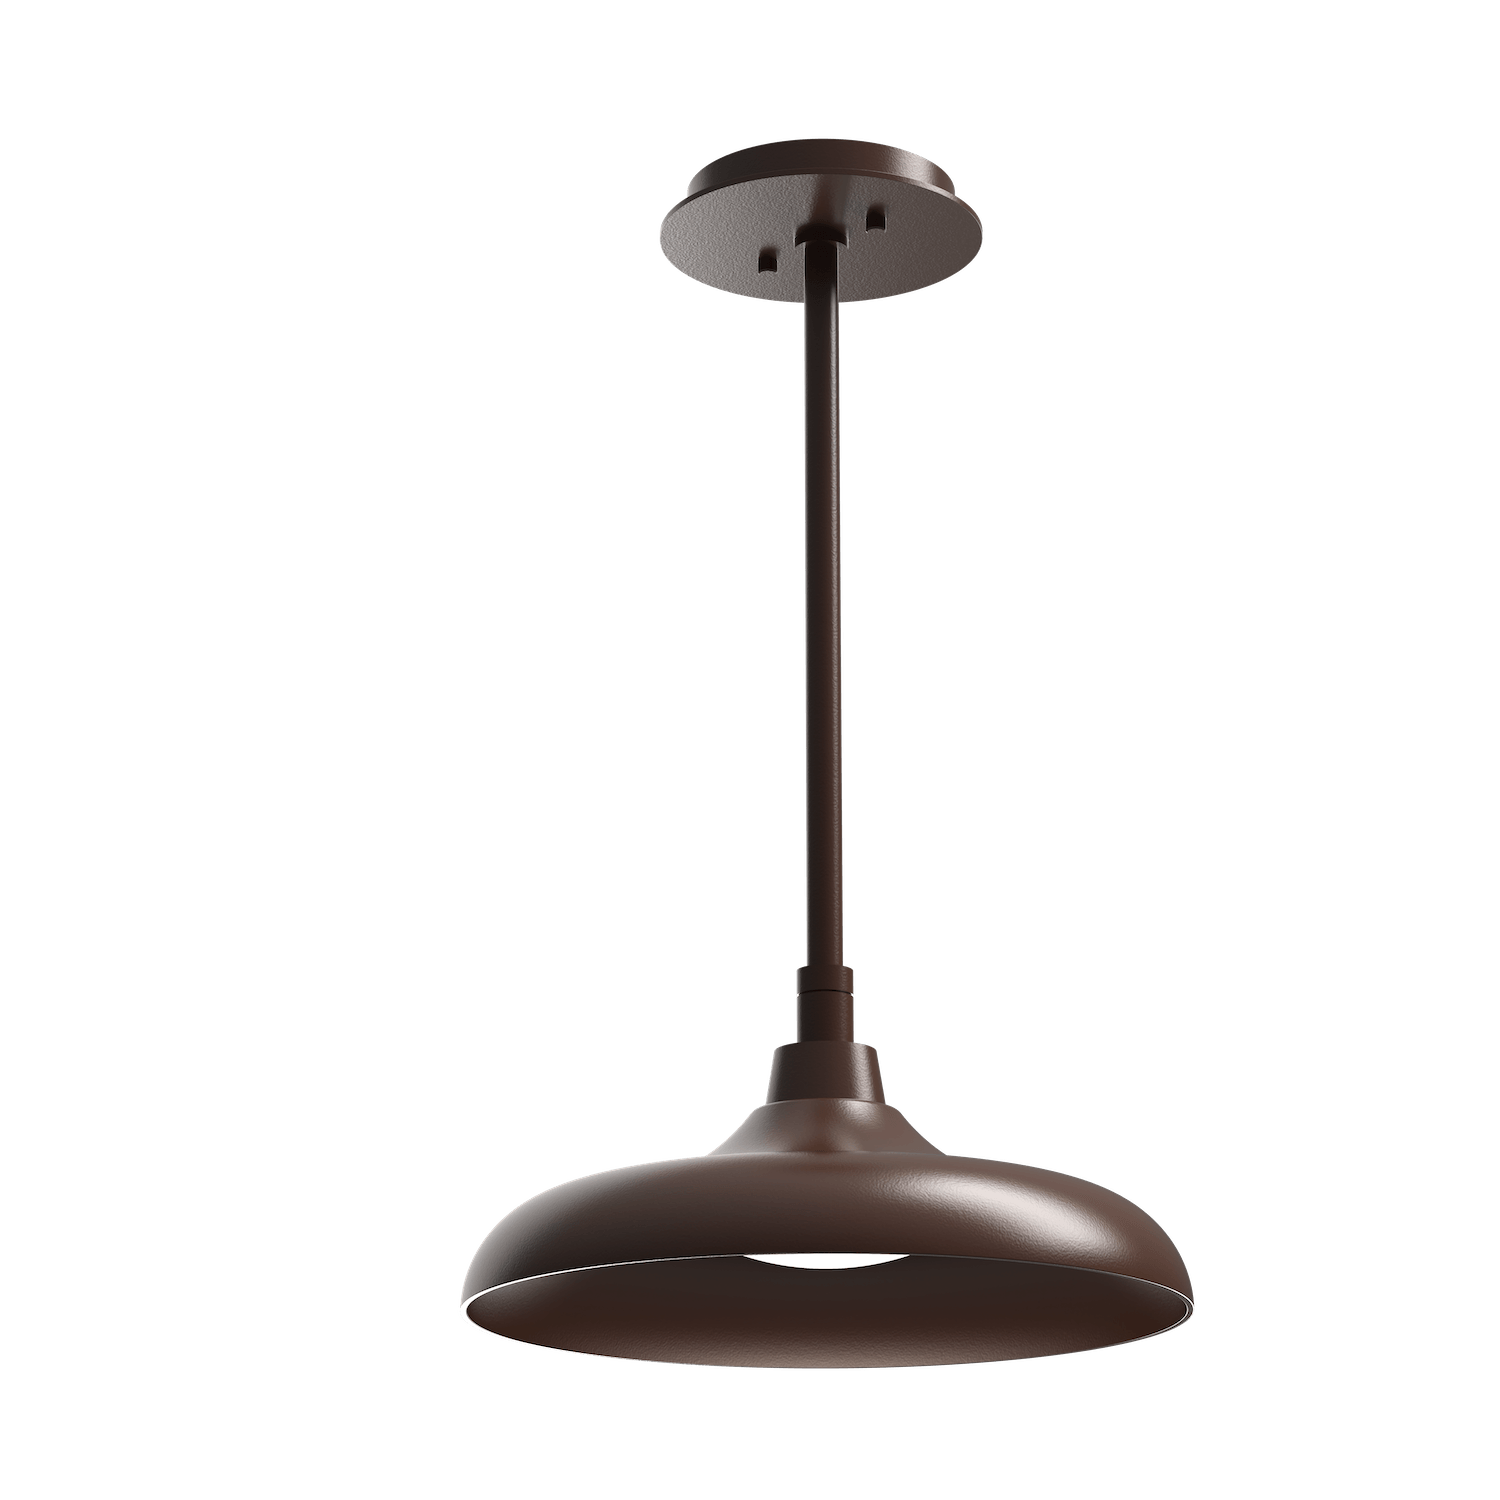 OPB0074-01-SB-O-Hammerton-Studio-Ranch-12-inch-outdoor-pendant-light-with-statuary-bronze-finish-and-frosted-glass-shade-and-LED-lamping